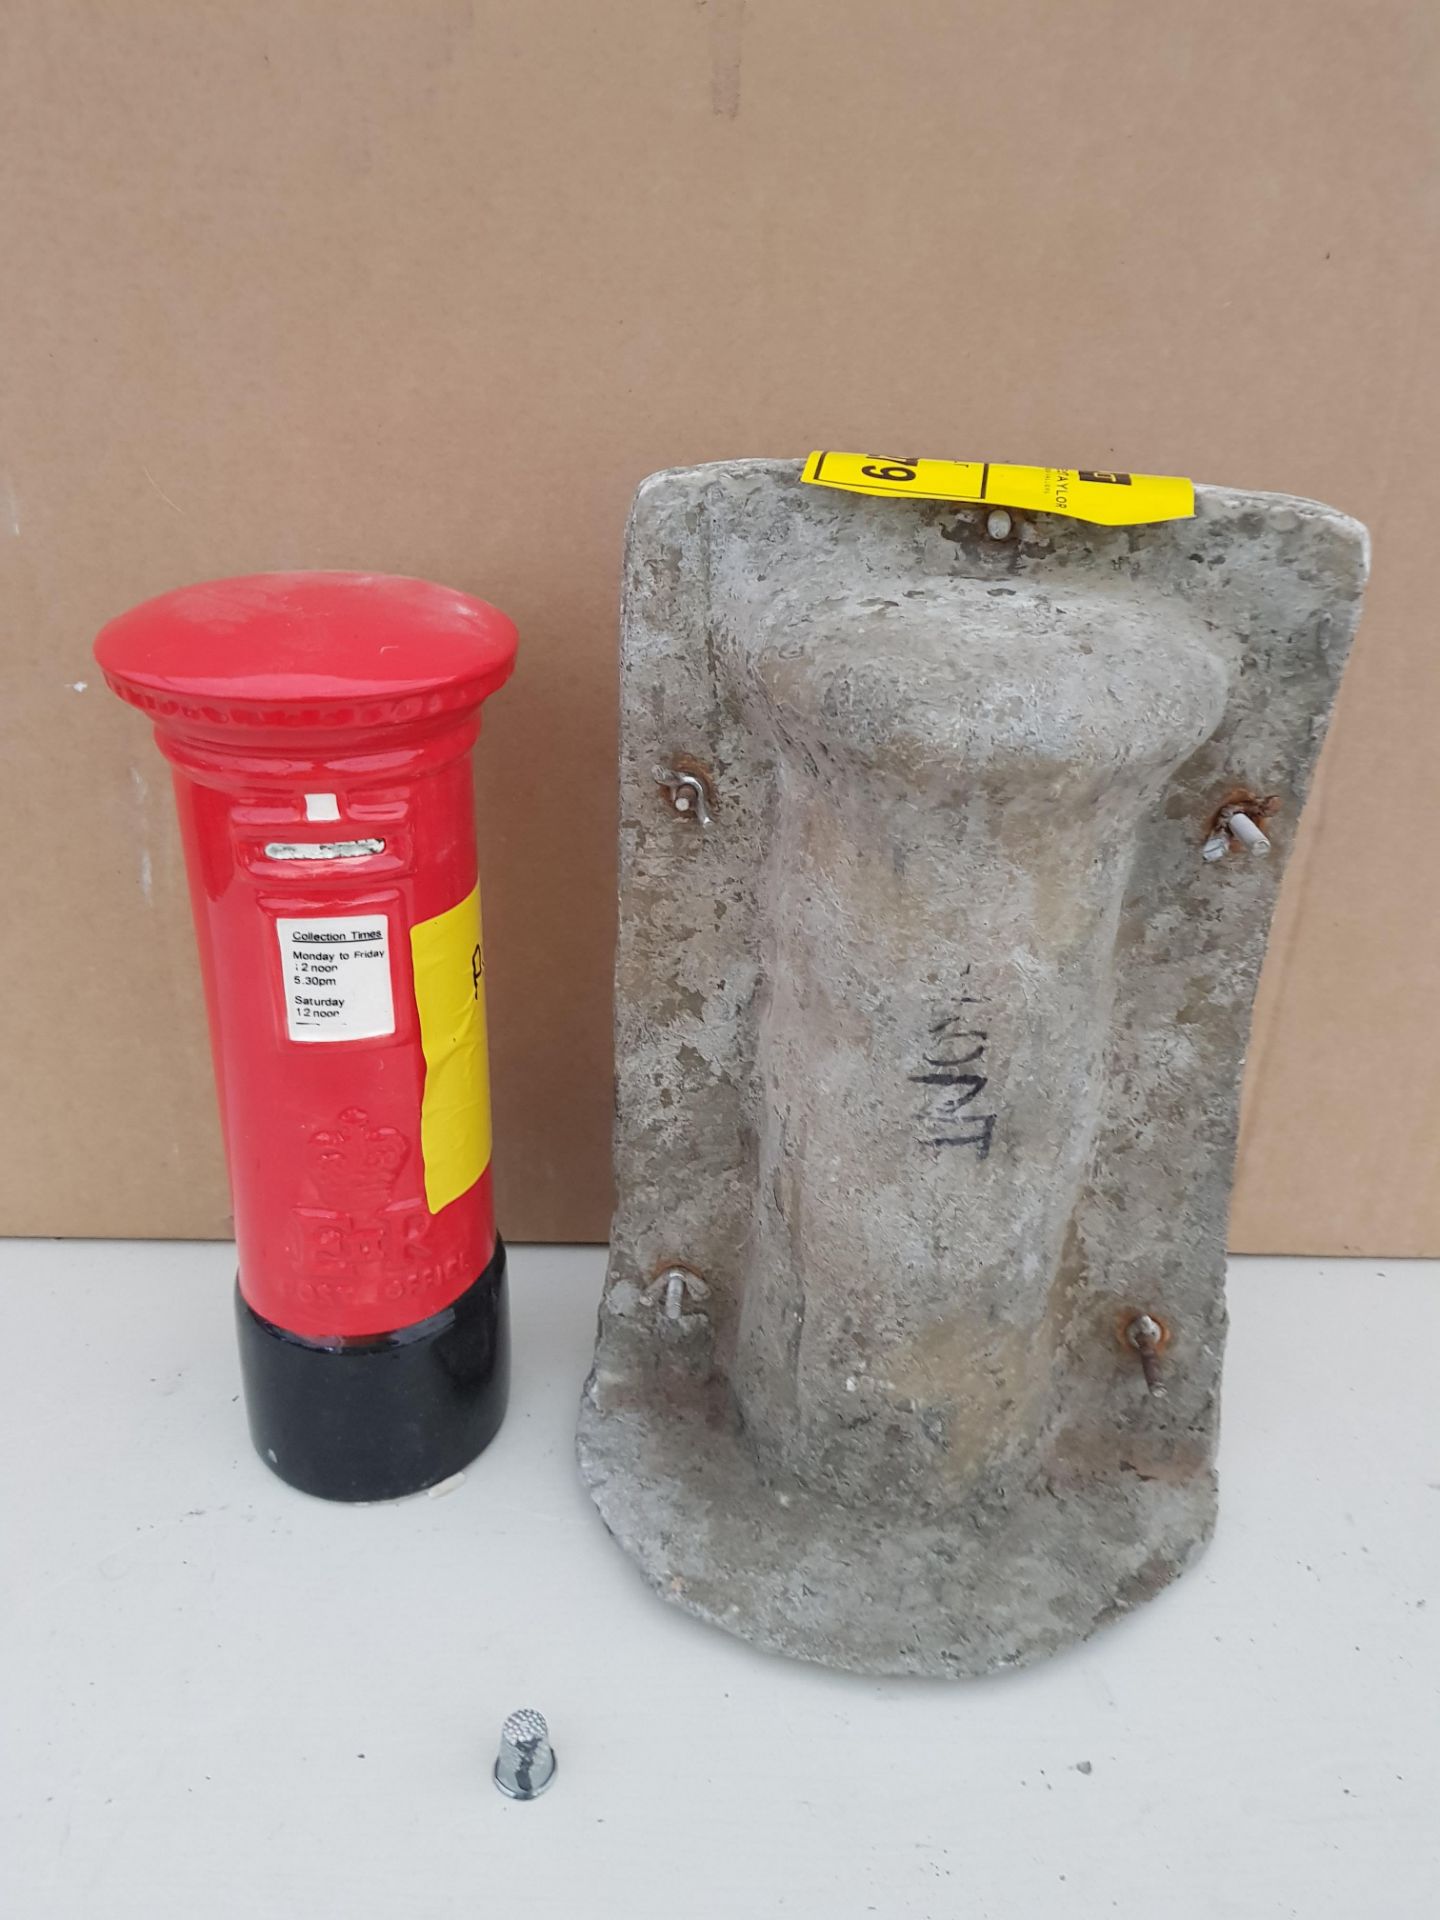 30CM PILLAR BOX MASTER CAST WITH LATEX SLIP & FIBRE GLASS MOULD (FOR CASTING PRODUCT TO RETAIL £19.